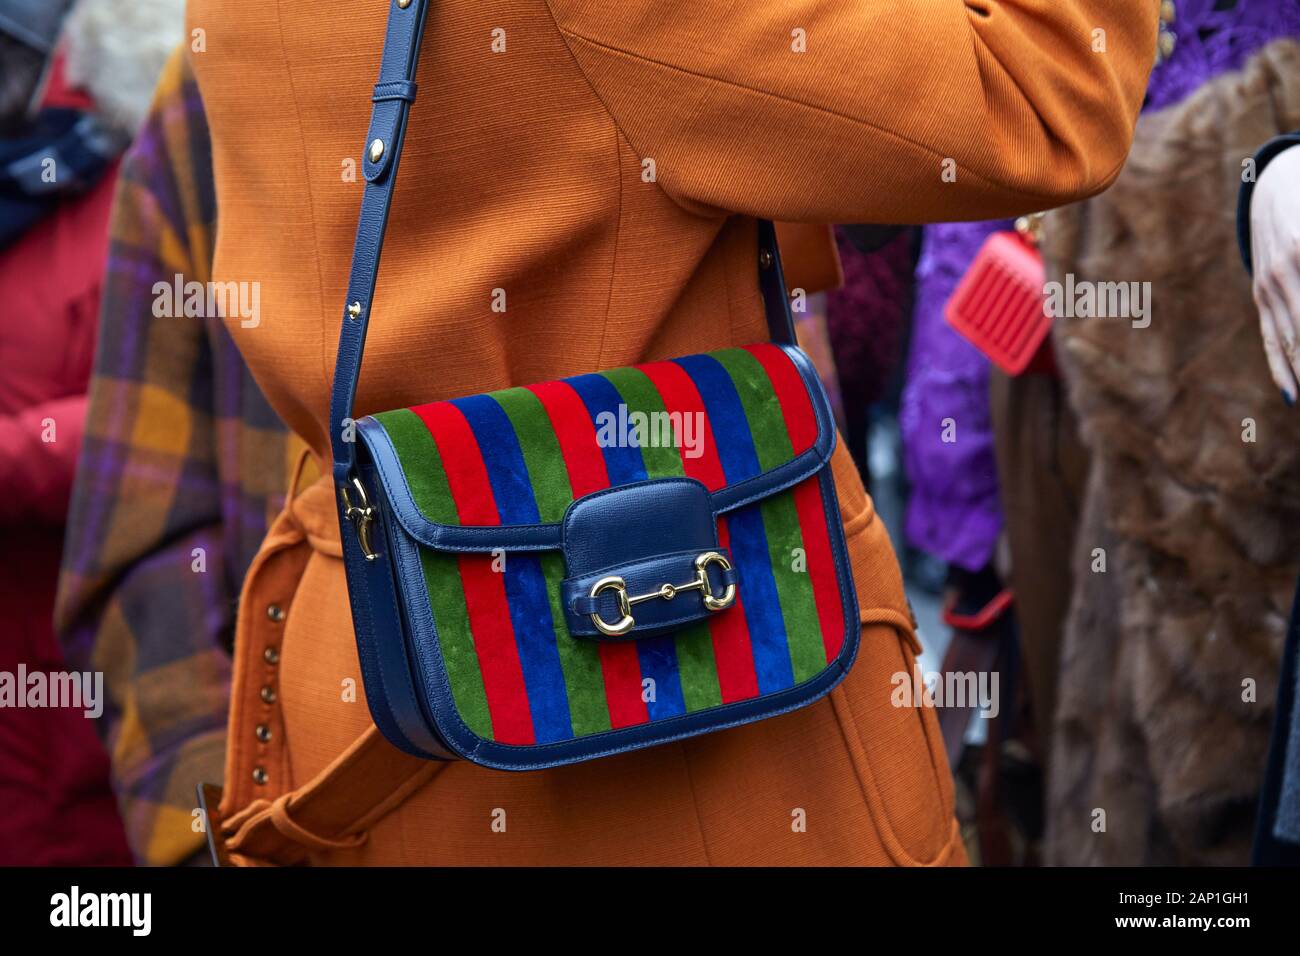 MILAN, ITALY - JANUARY 14, 2019: Woman with green, red and blue striped Gucci  bag before Gucci fashion show, Milan Fashion Week street style Stock Photo  - Alamy